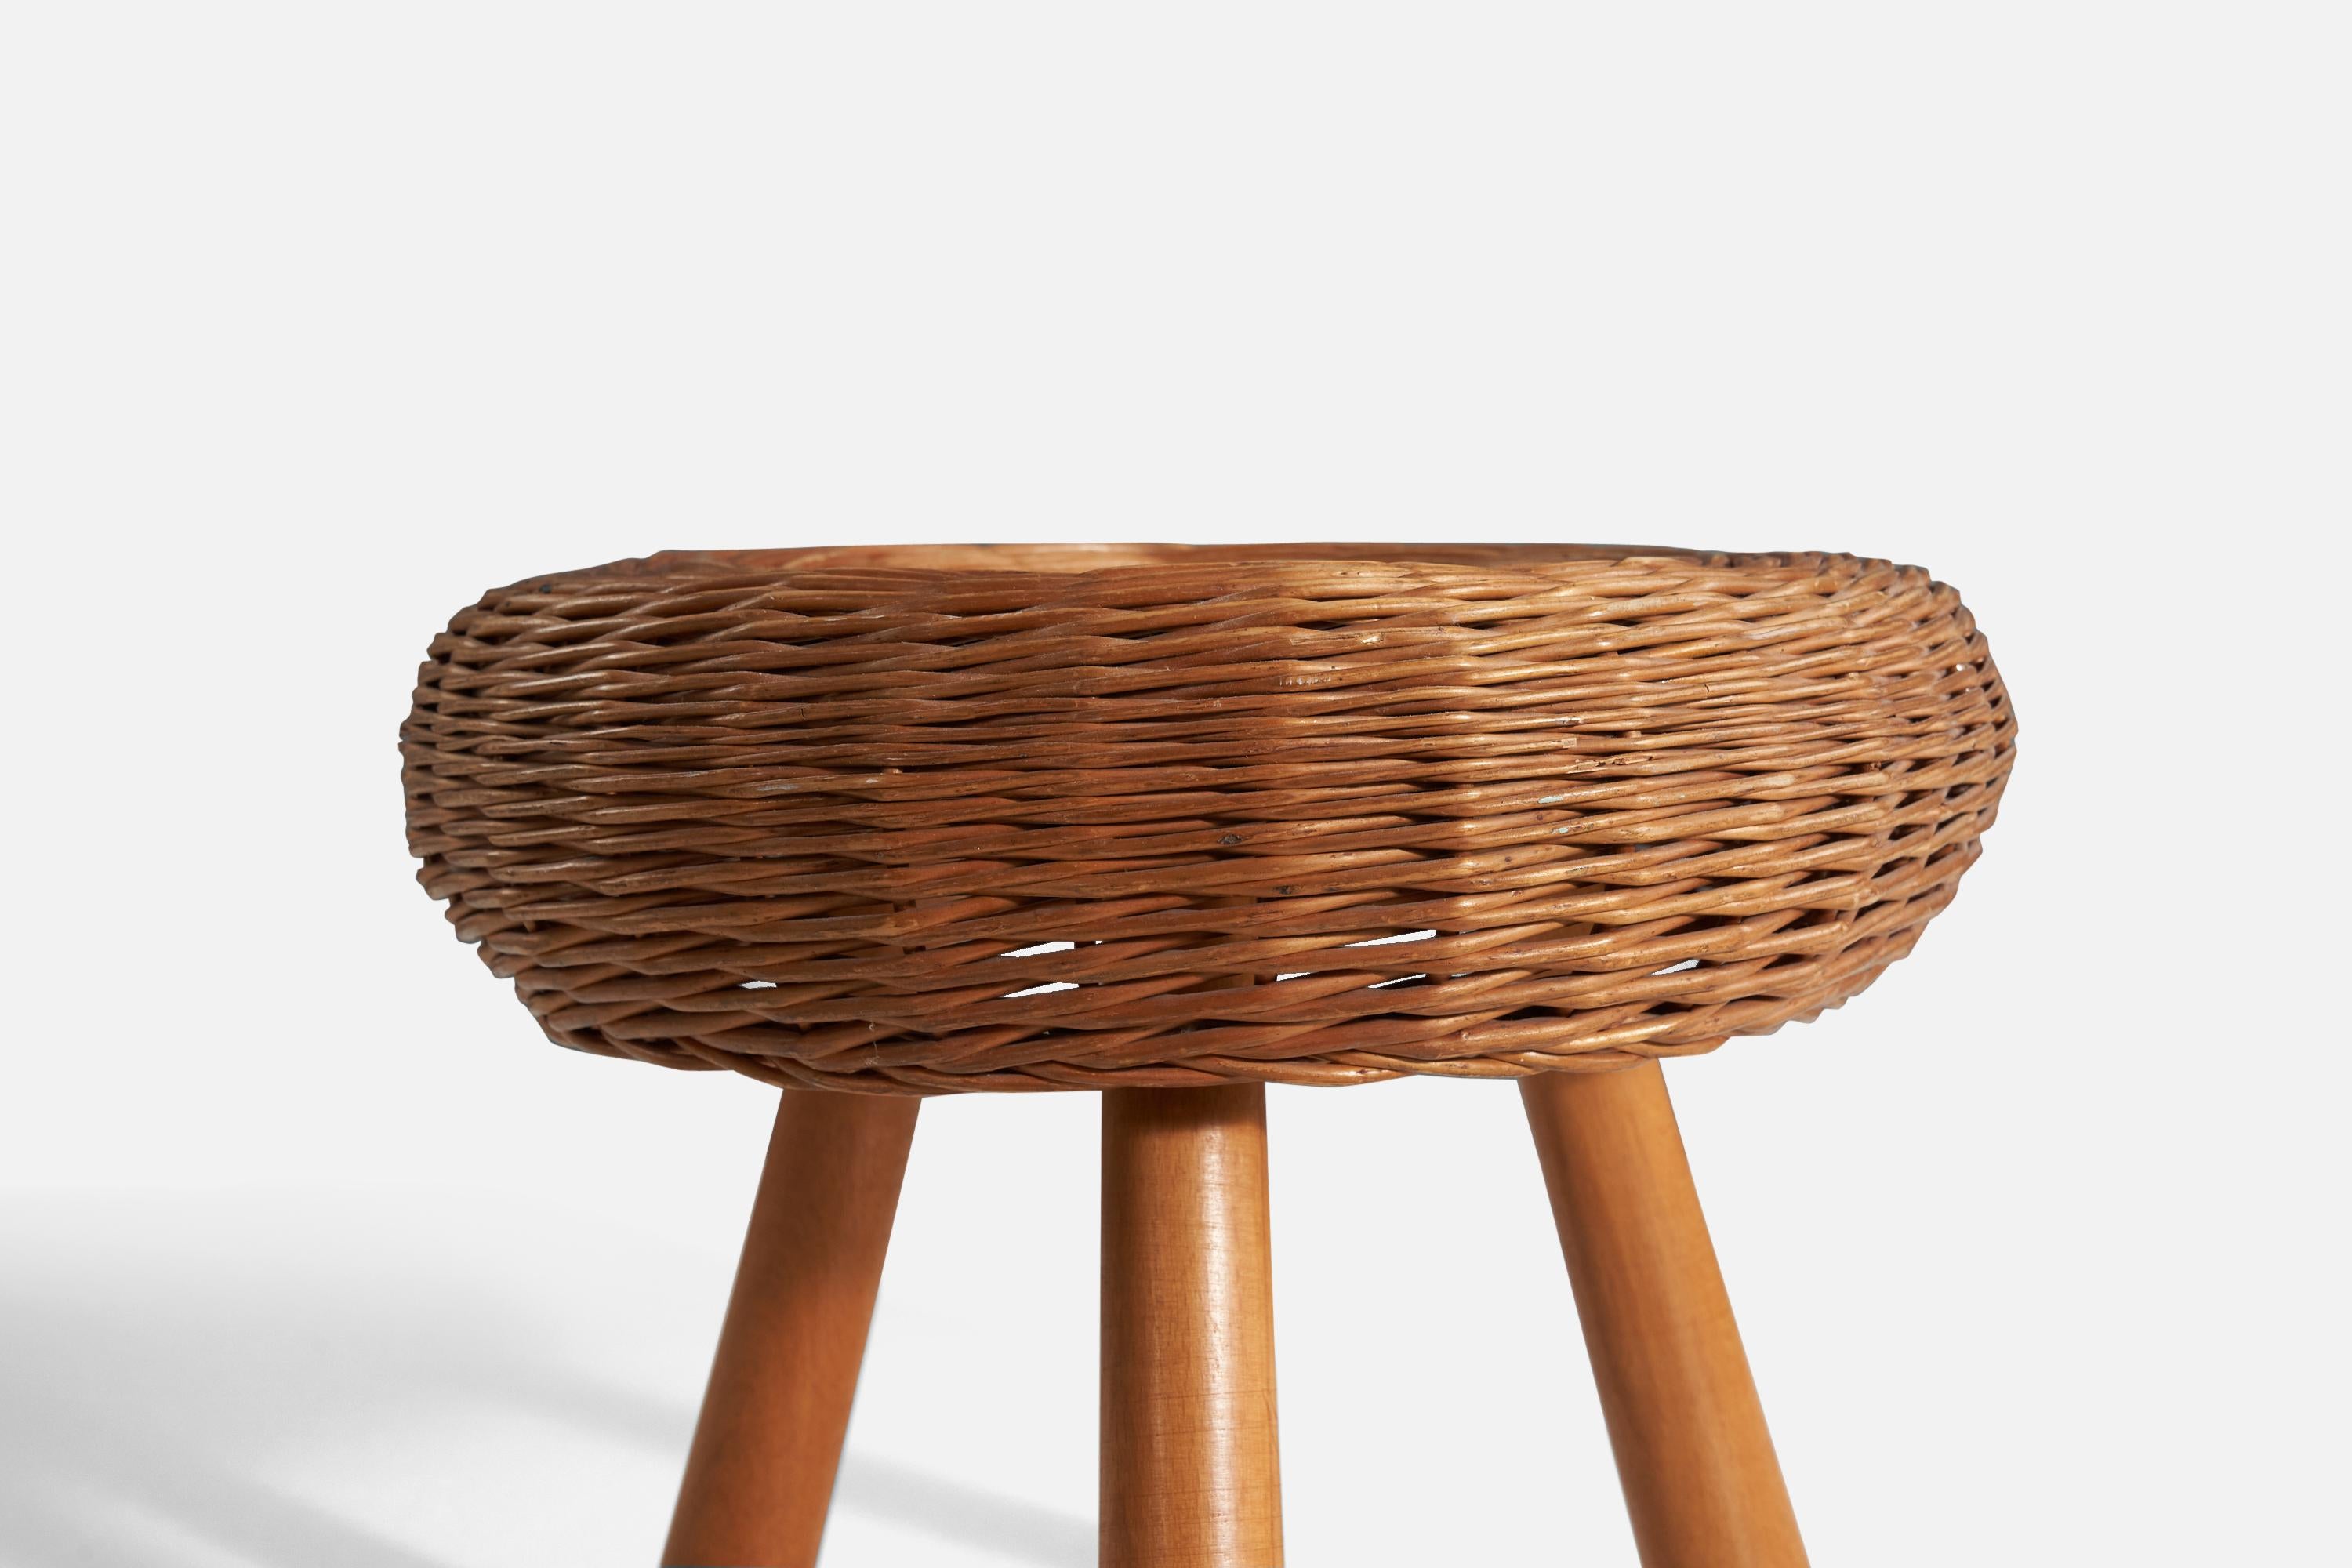 American Tony Paul 'Attributed', Stool, Wicker, Wood, United States, 1950s